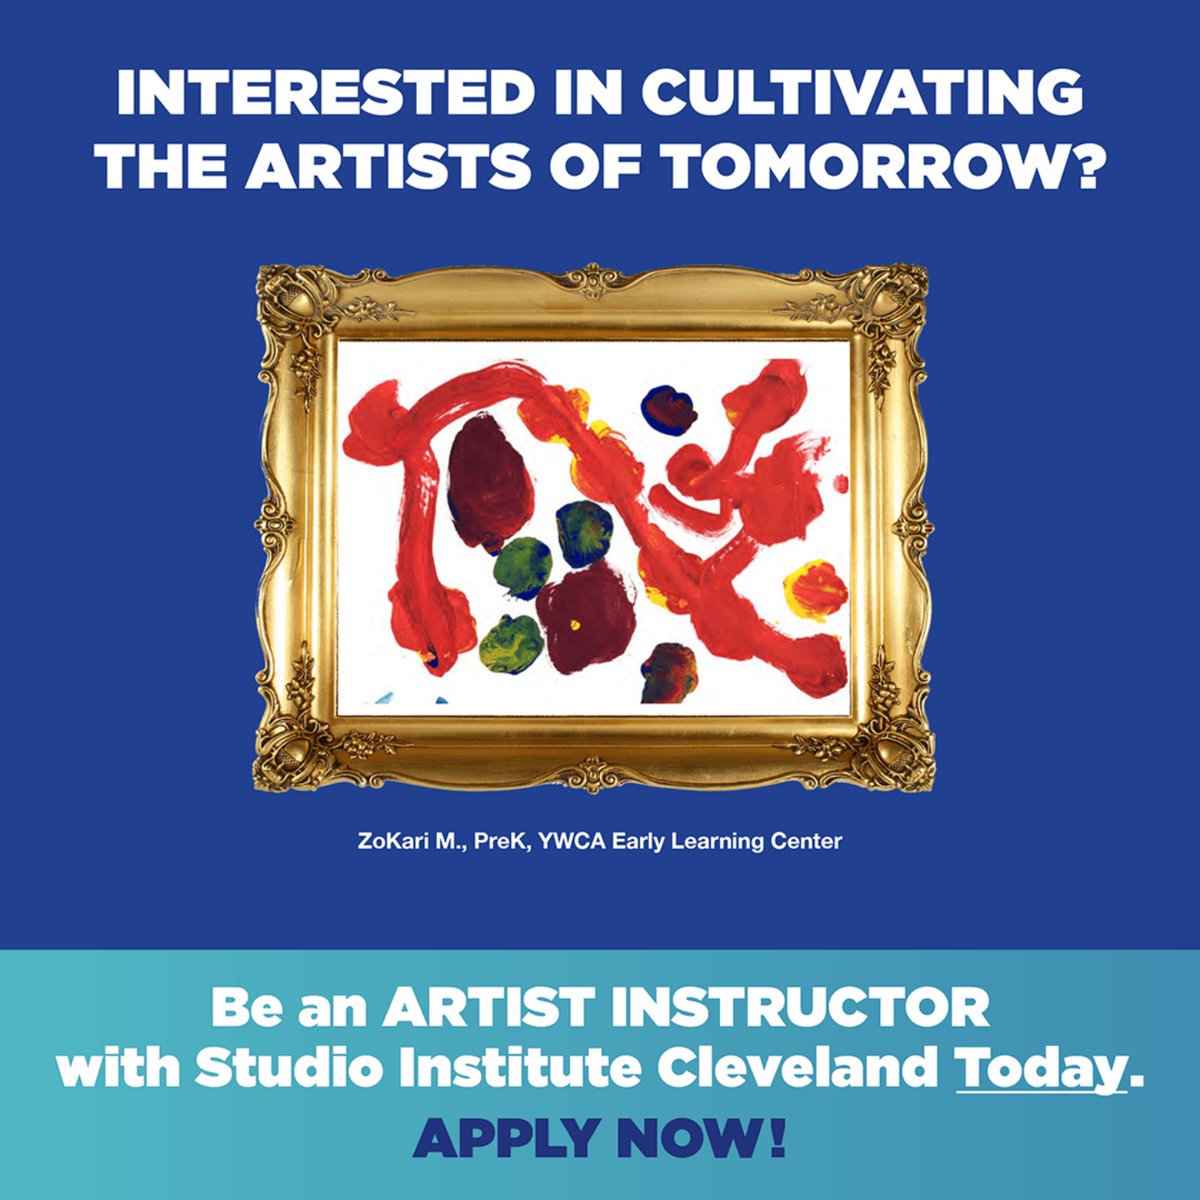 Meet Ashley Krug, an Artist Instructor hailing from Cleveland. Swipe to hear why she adores being an Artist Instructor and how she's making a lasting impact on young minds. Apply now and let your creativity soar with us! studioinstitute.org/join-a-communi…